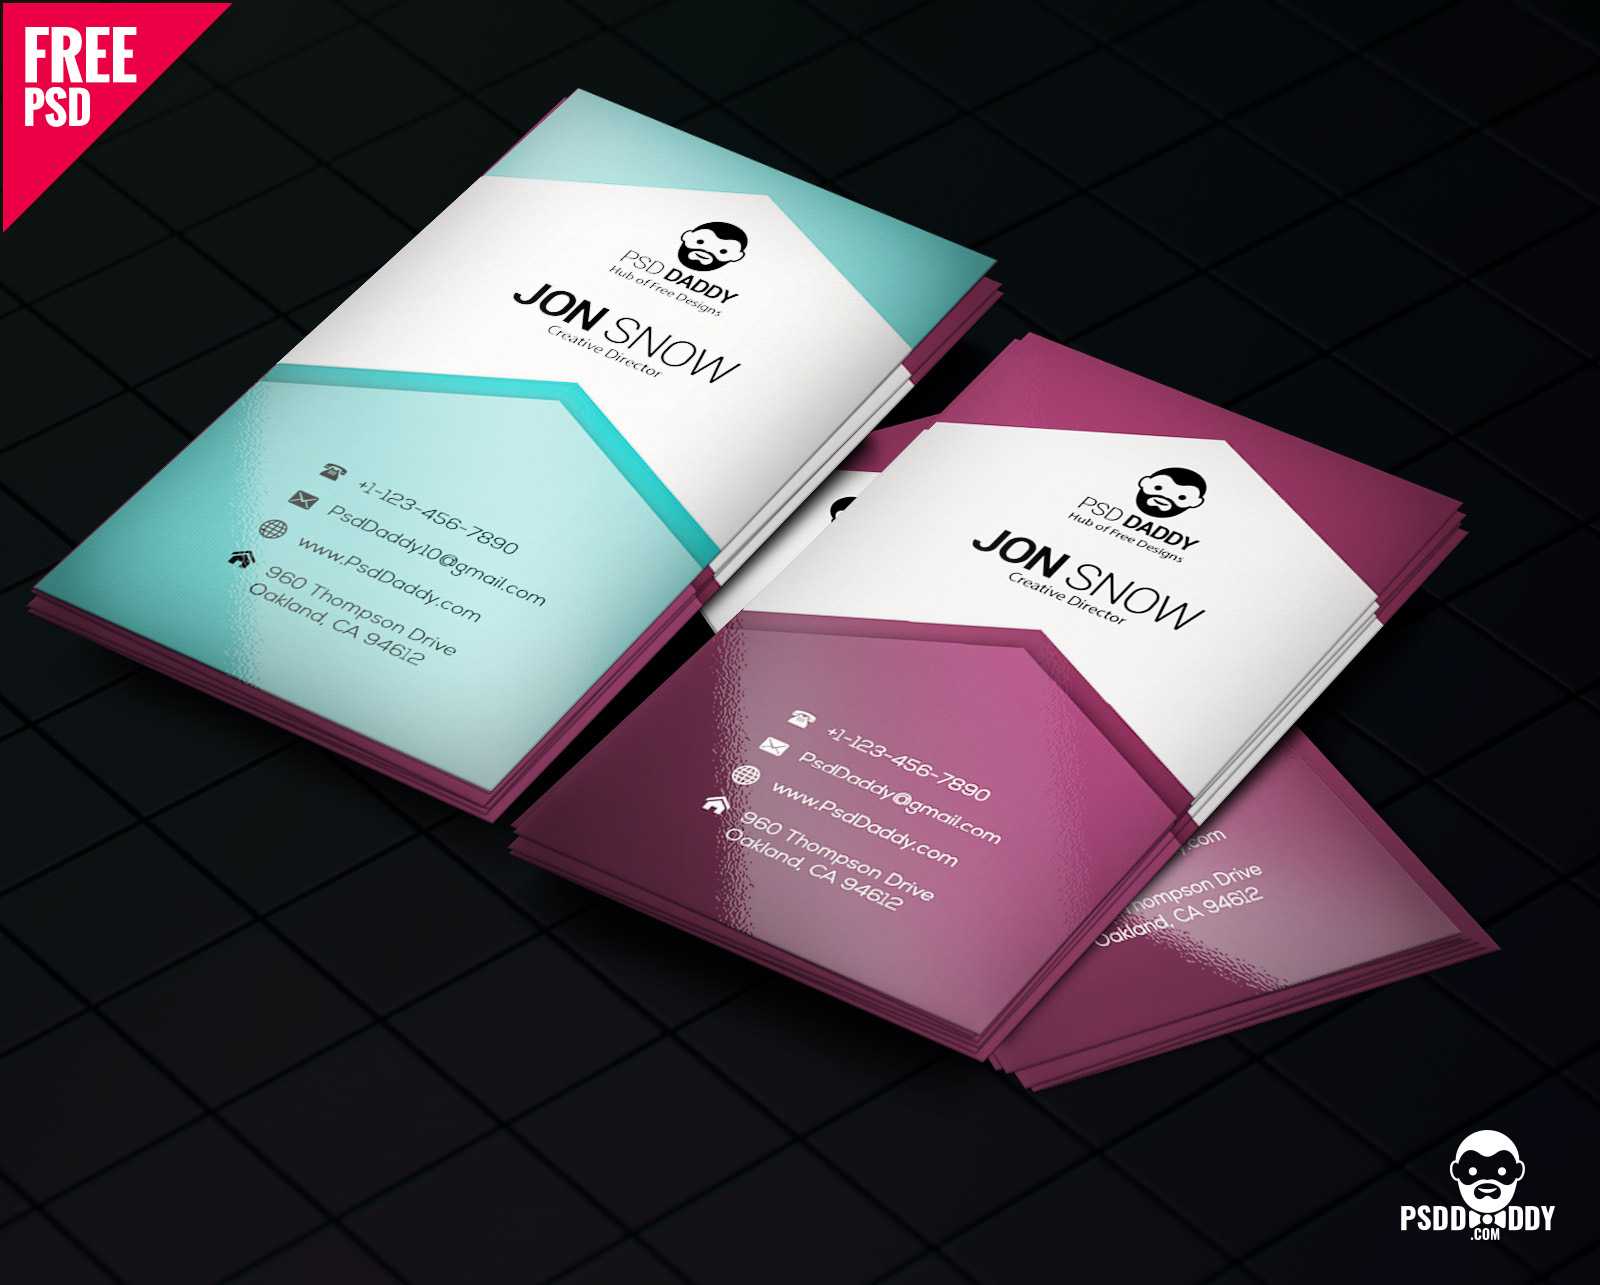 Download]Creative Business Card Psd Free | Psddaddy With Regard To Visiting Card Templates Download